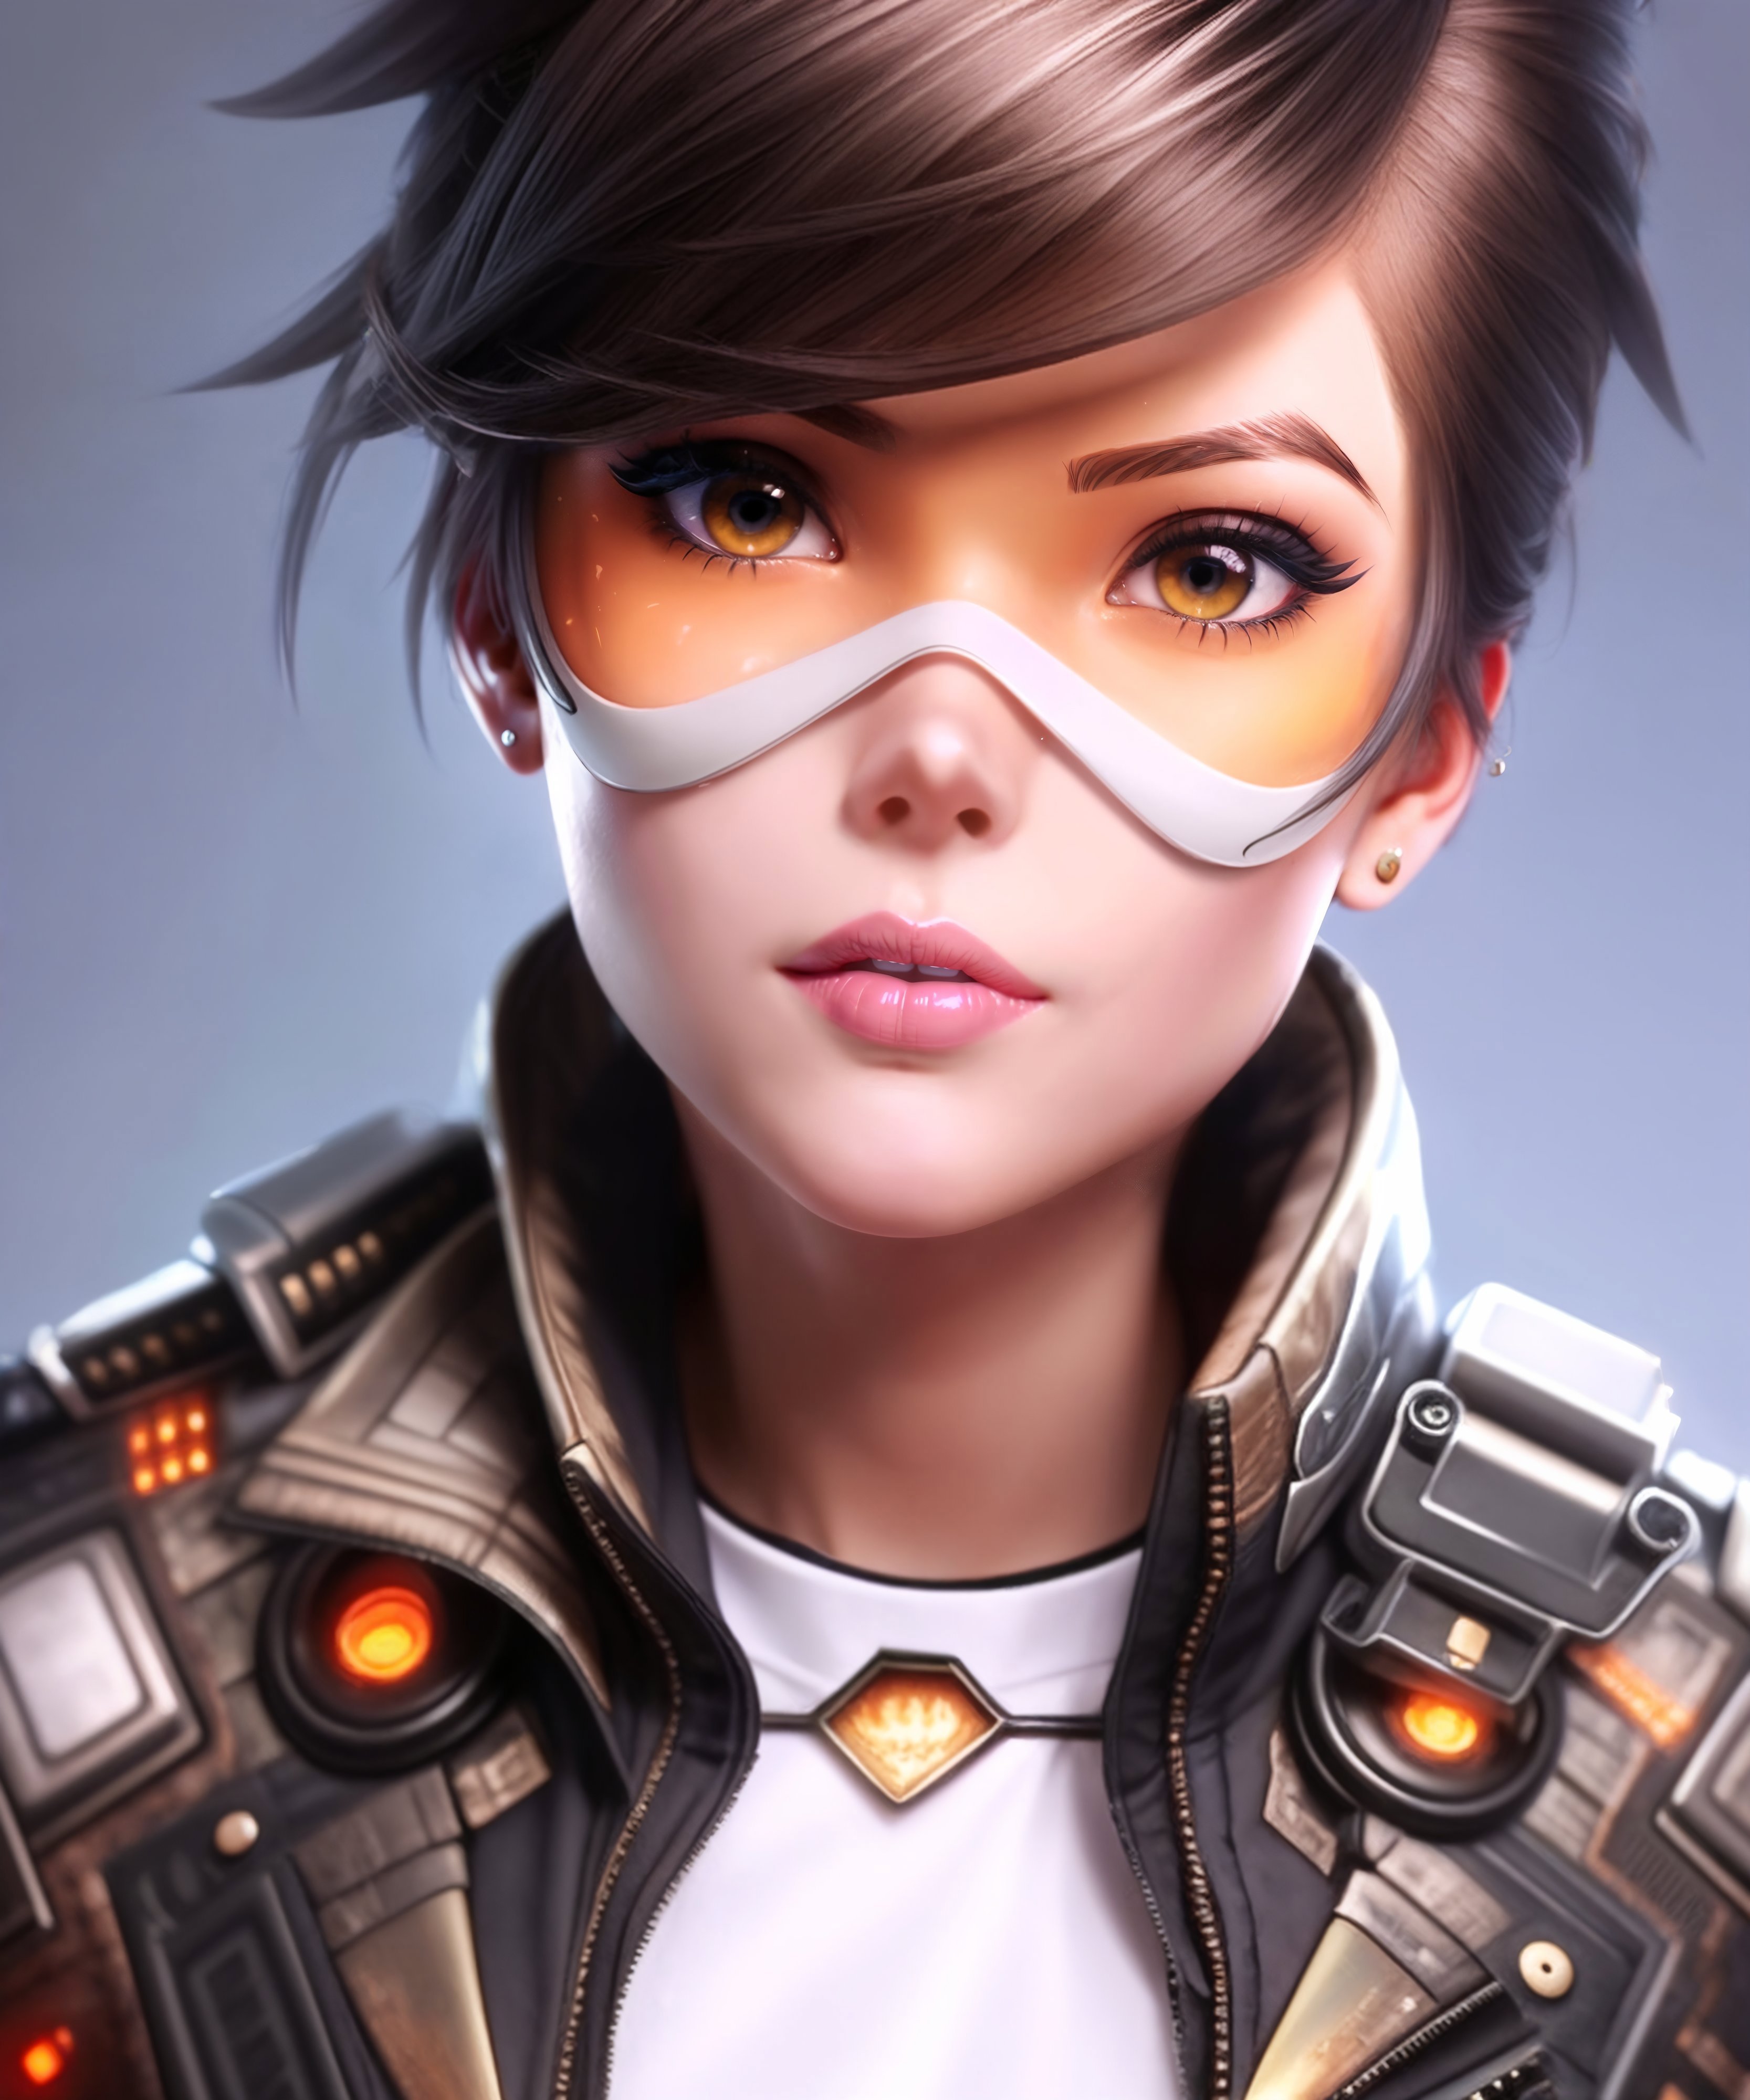 Tracer - Overwatch. image by Digital_Art_AI